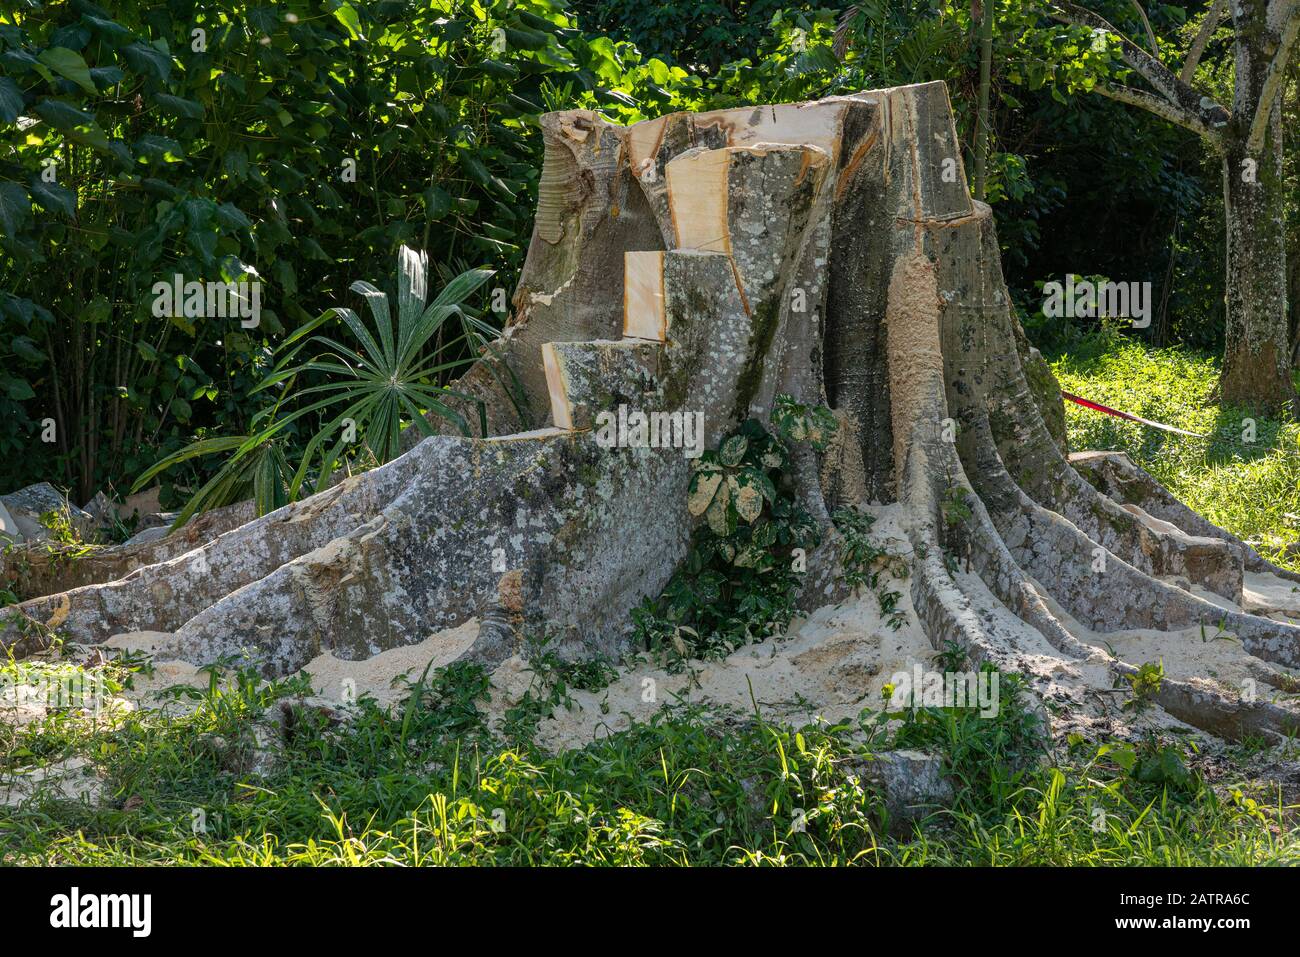 Tree stump of large tropical tree cut into steps after the main ...